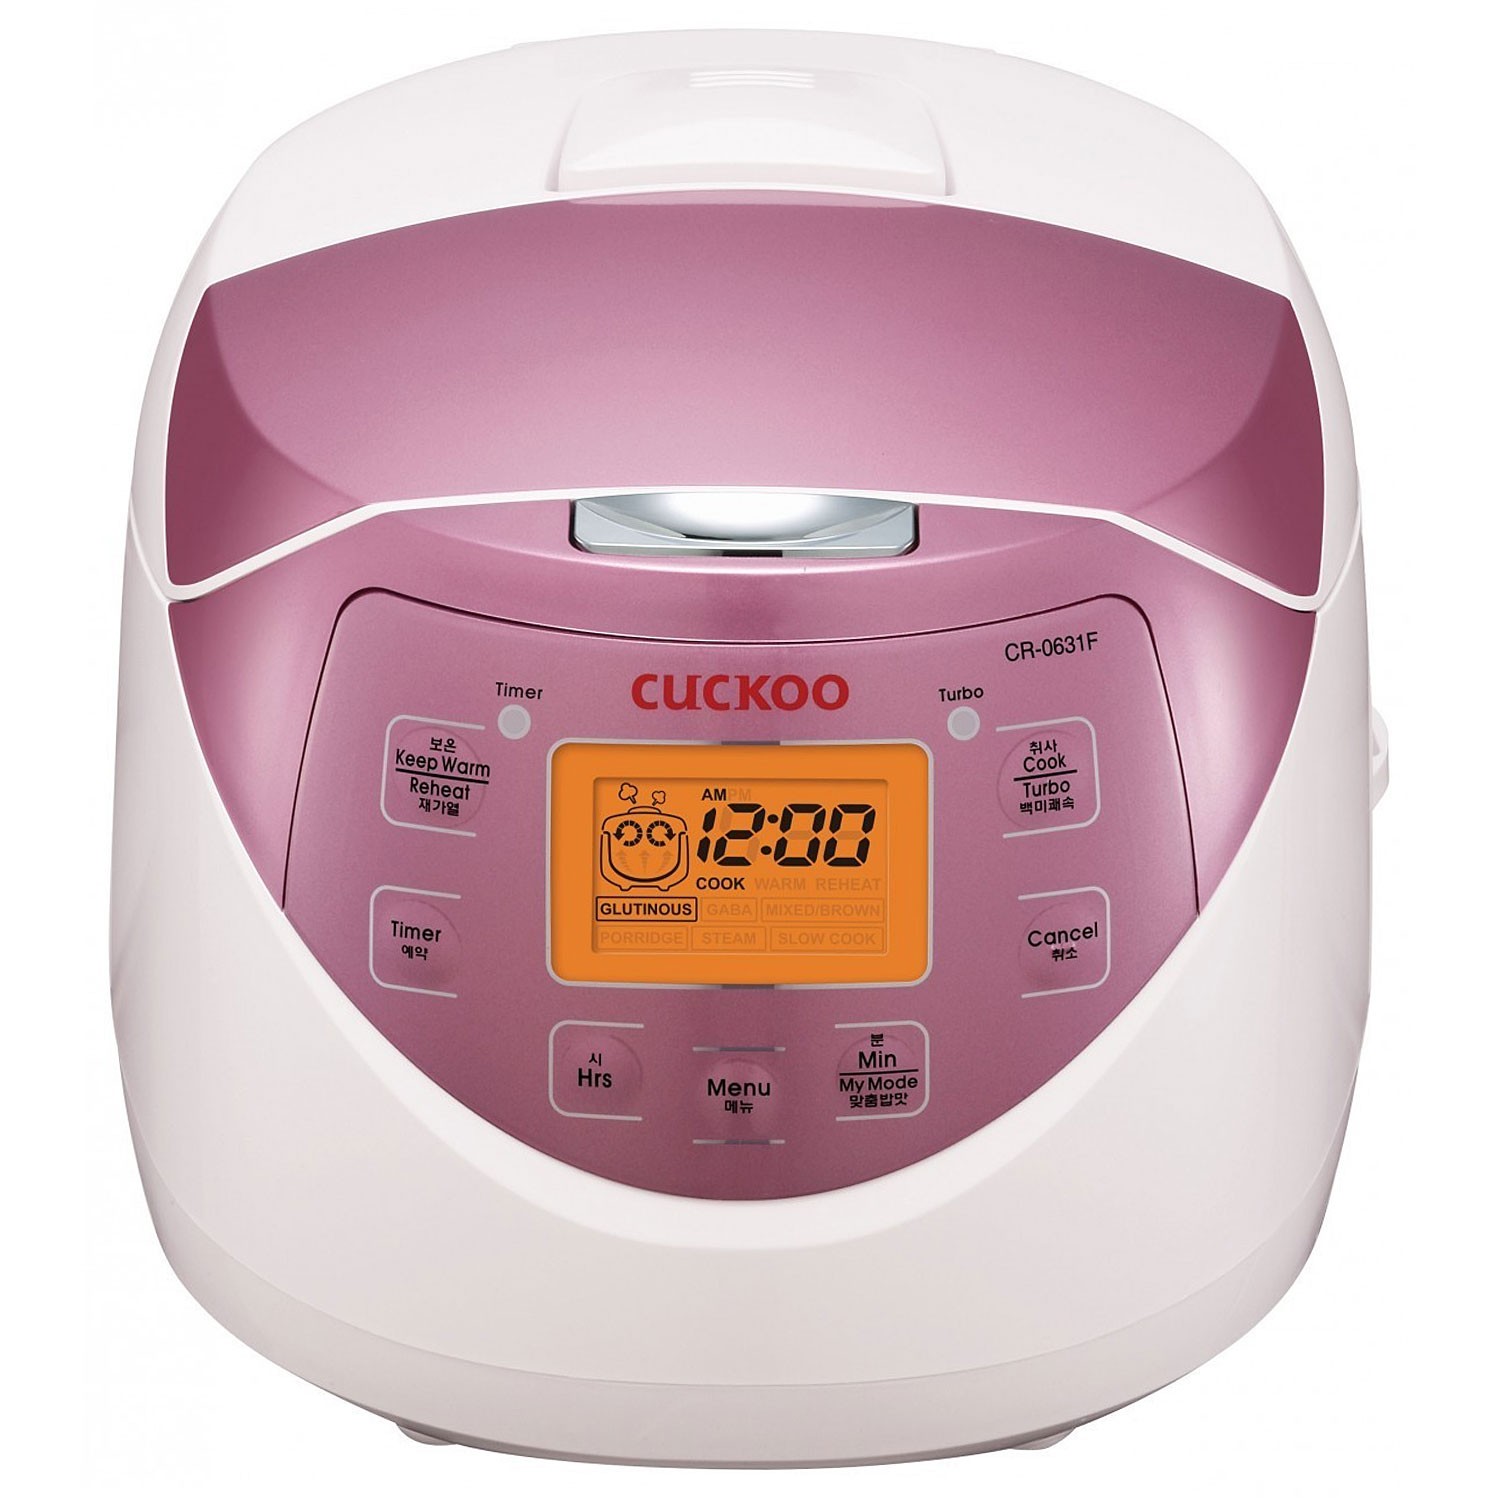 CR-0631F 6 Cup Electric Heating Rice Cooker, 110v, Pink